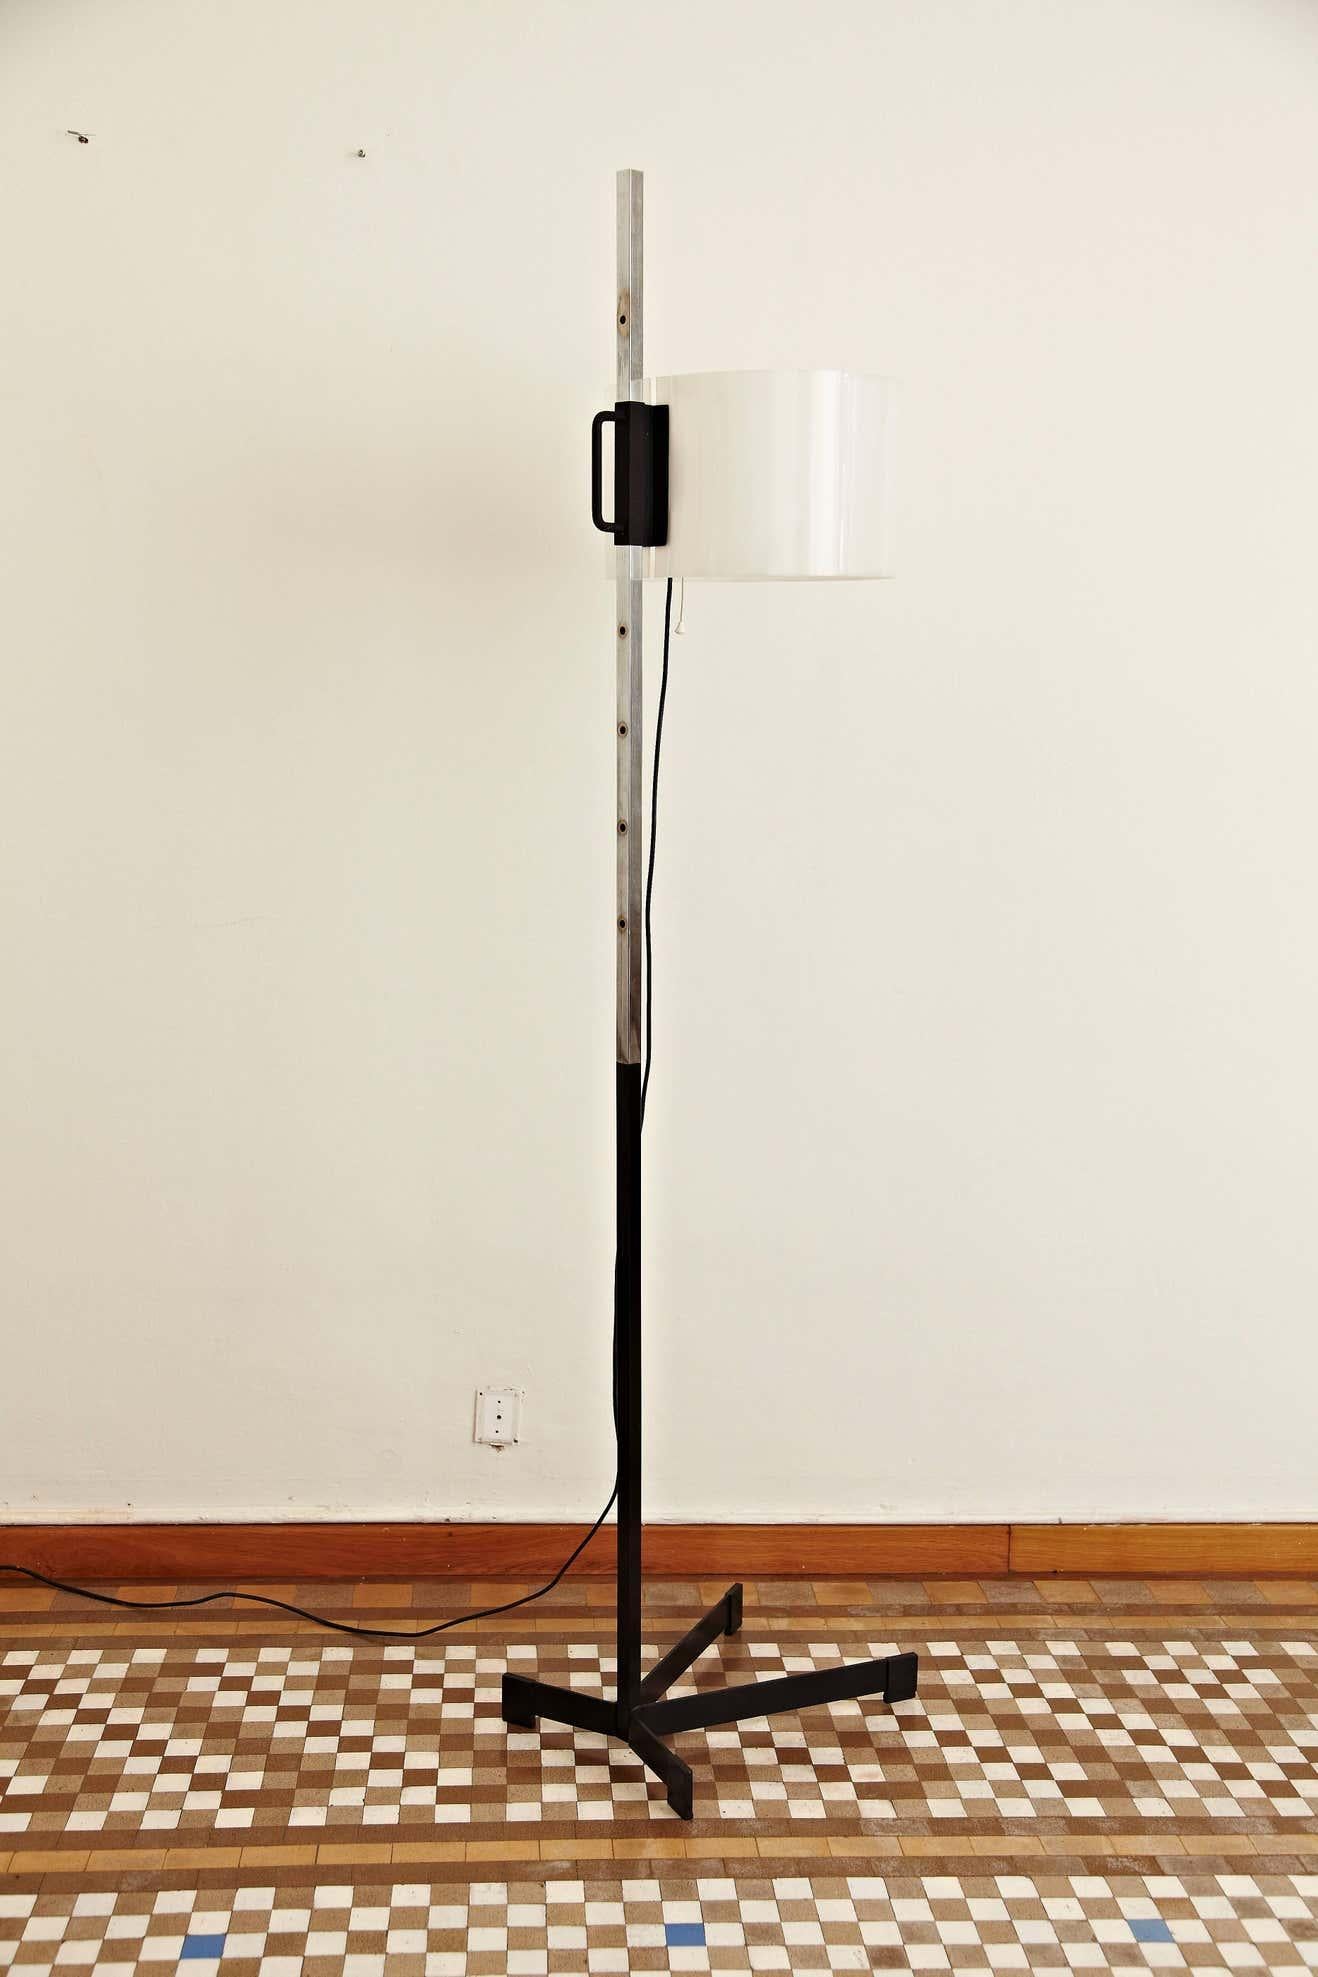 Floor lamp designed by Miguel Mila´, circa 1950.
Manufactured by Tramo (Spain), circa 1950.

Signed with serial number 20.

In good original condition, with minor wear consistent with age and use, preserving a beautiful patina.

Miguel Mila´